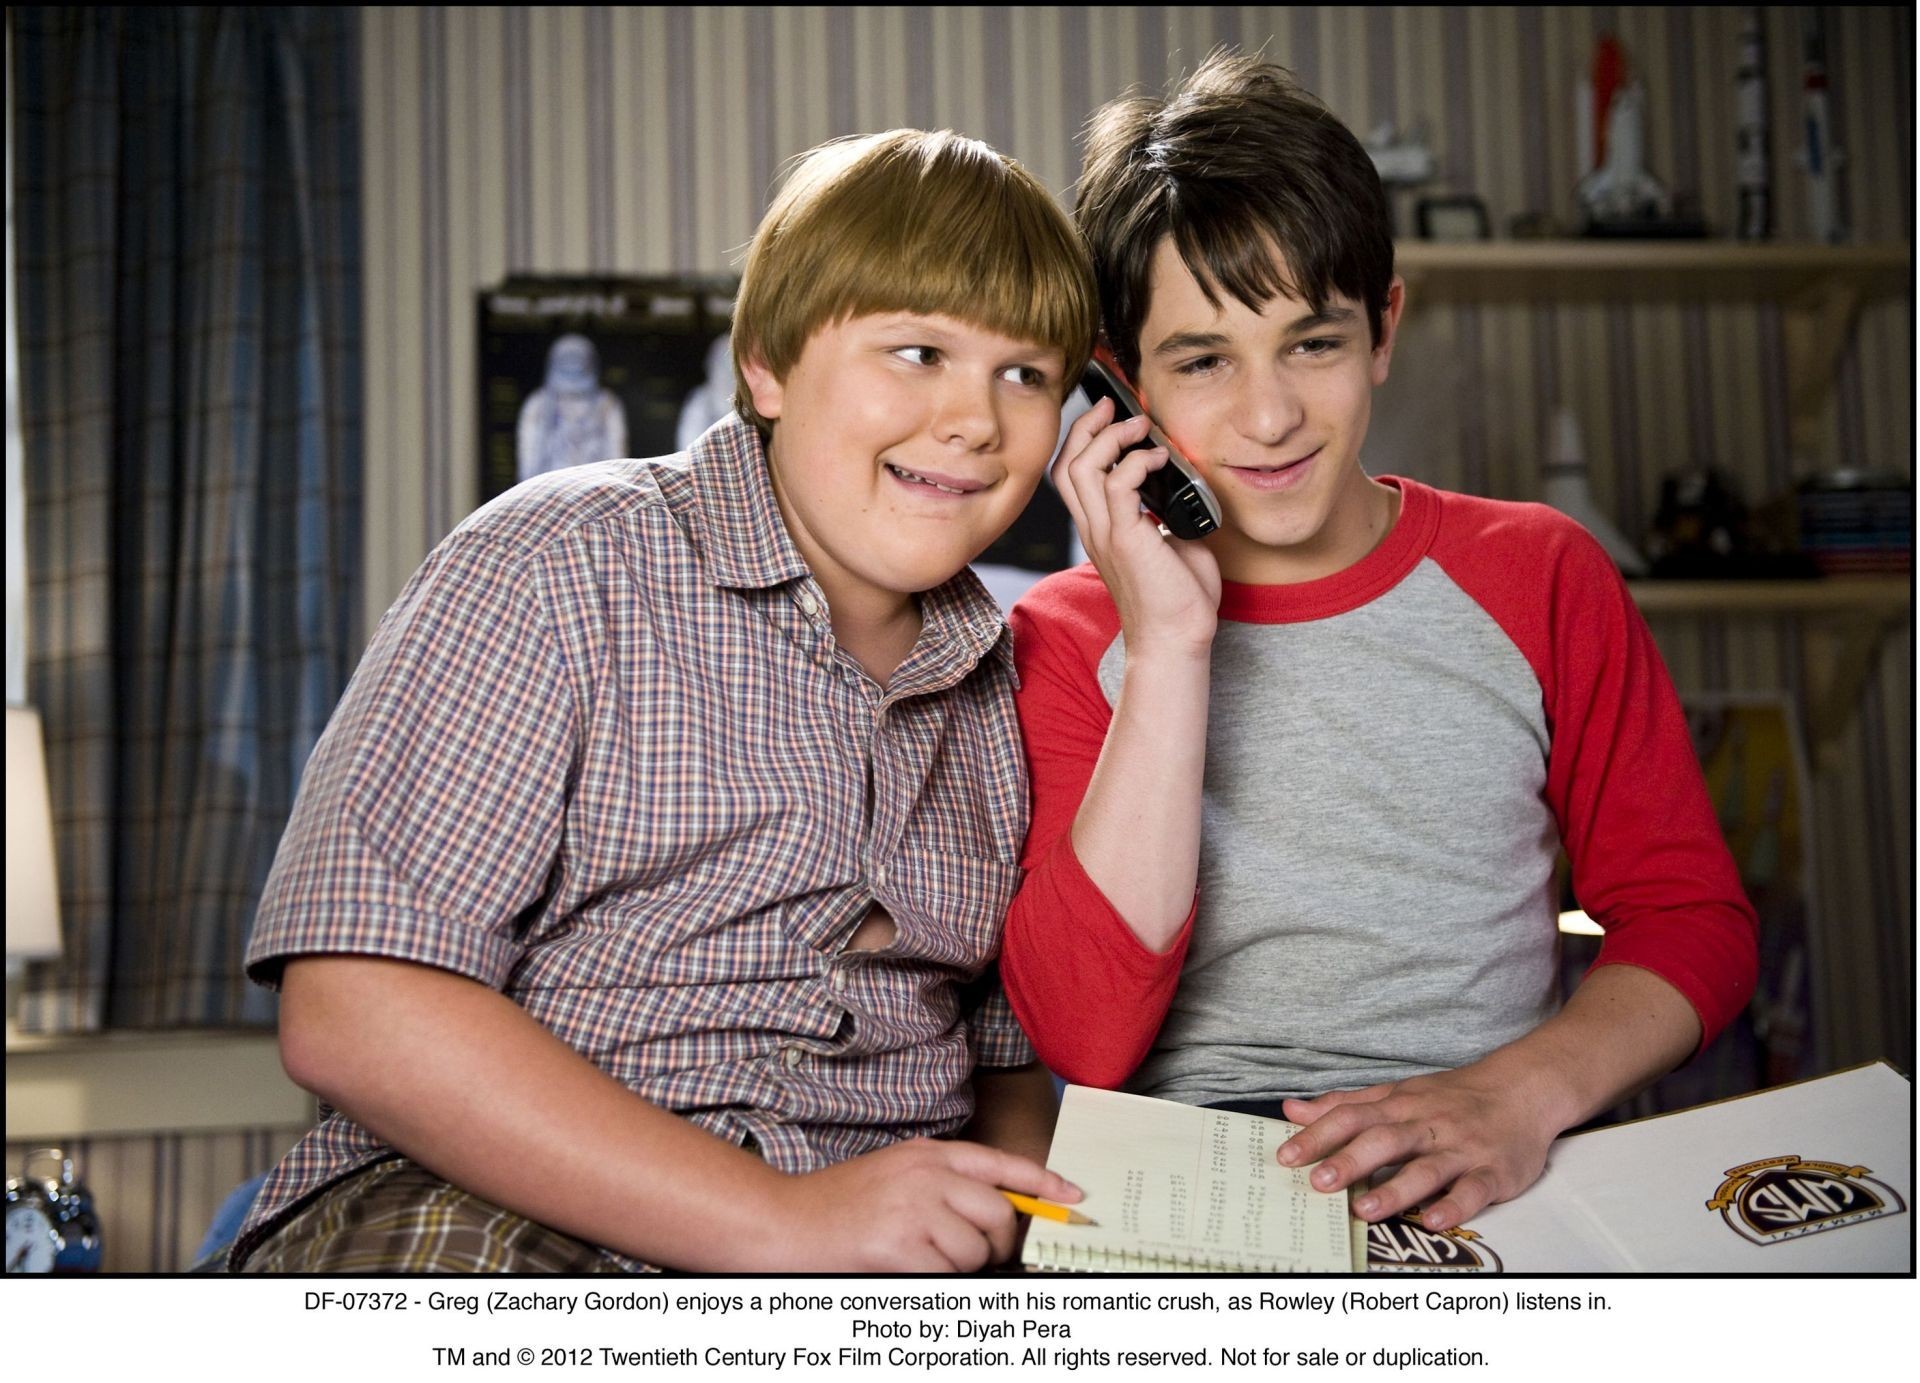 Robert Capron stars as Rowley Jefferson and Zachary Gordon stars as Greg Heffley in The 20th Century Fox's Diary of a Wimpy Kid: Dog Days (2012). Photo credit by Diyah Pera.